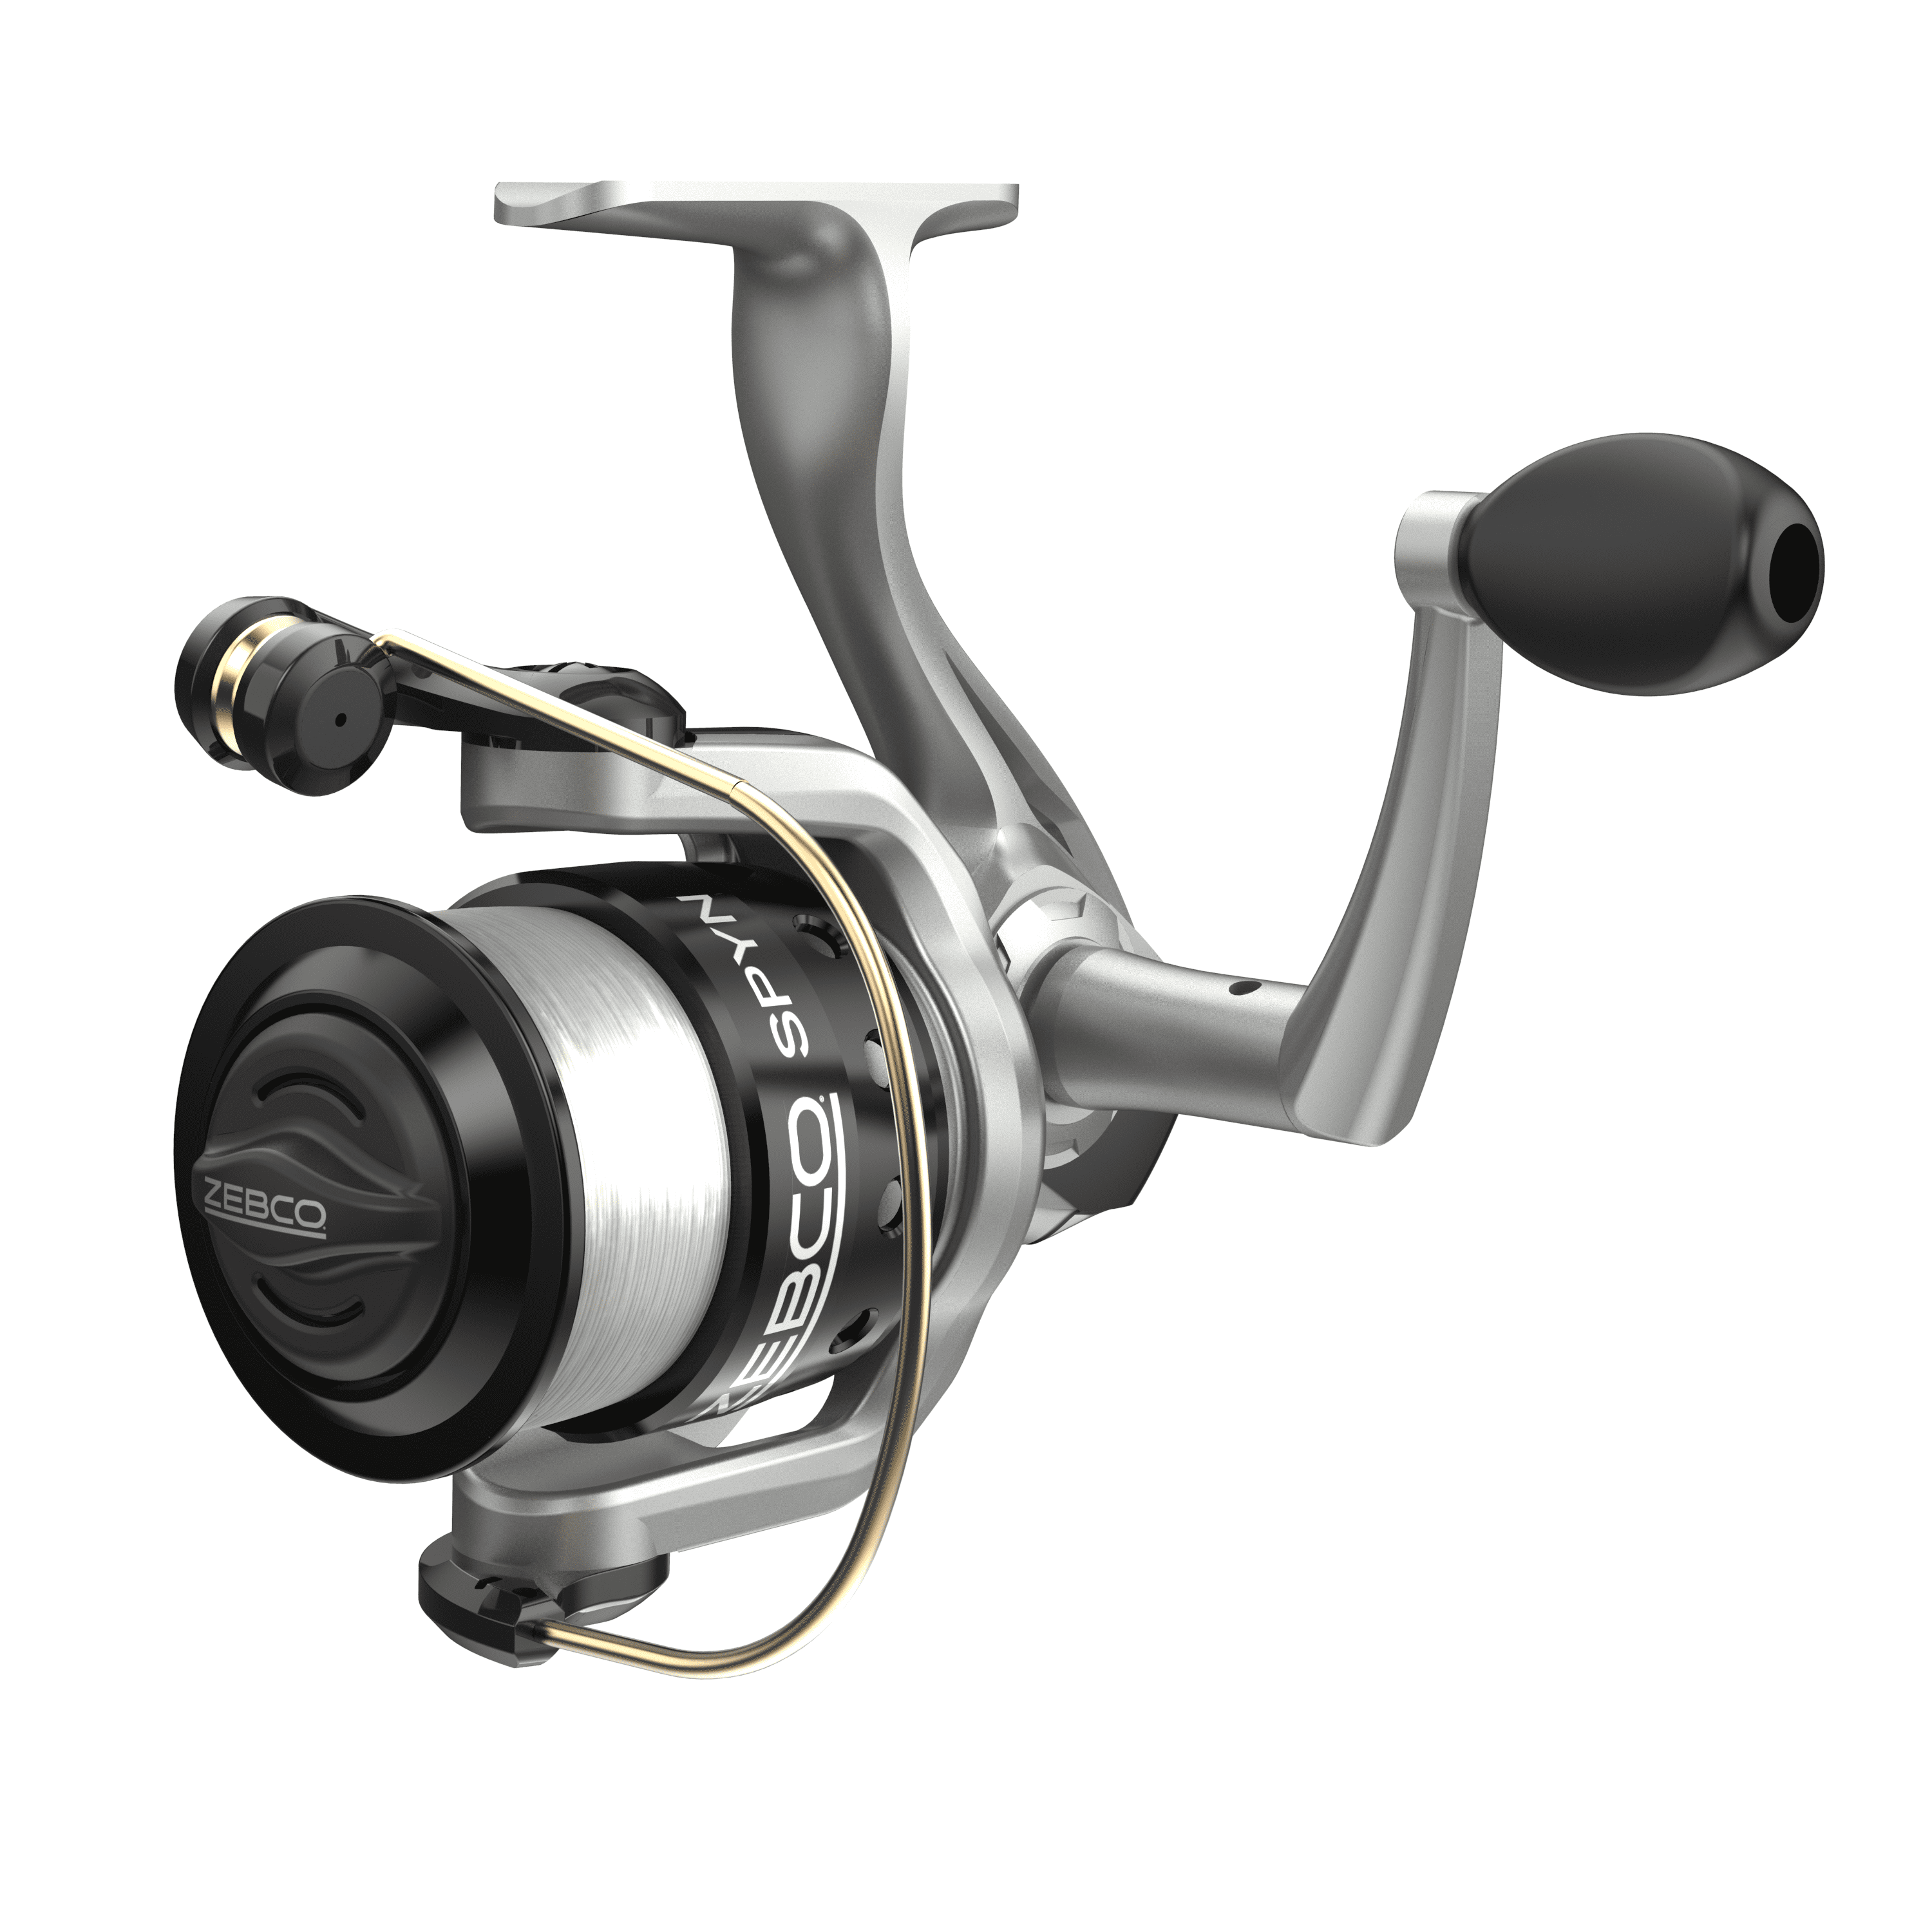 Zebco Spyn Spinning Fishing Reel, Size 10 Reel, Aluminum Spool, Super Tough  Titanium-Nitride Plated Bail Wire, 4.3:1 Gear Ratio, Pre-Spooled with 6- Pound Zebco Line, Silver/Black 